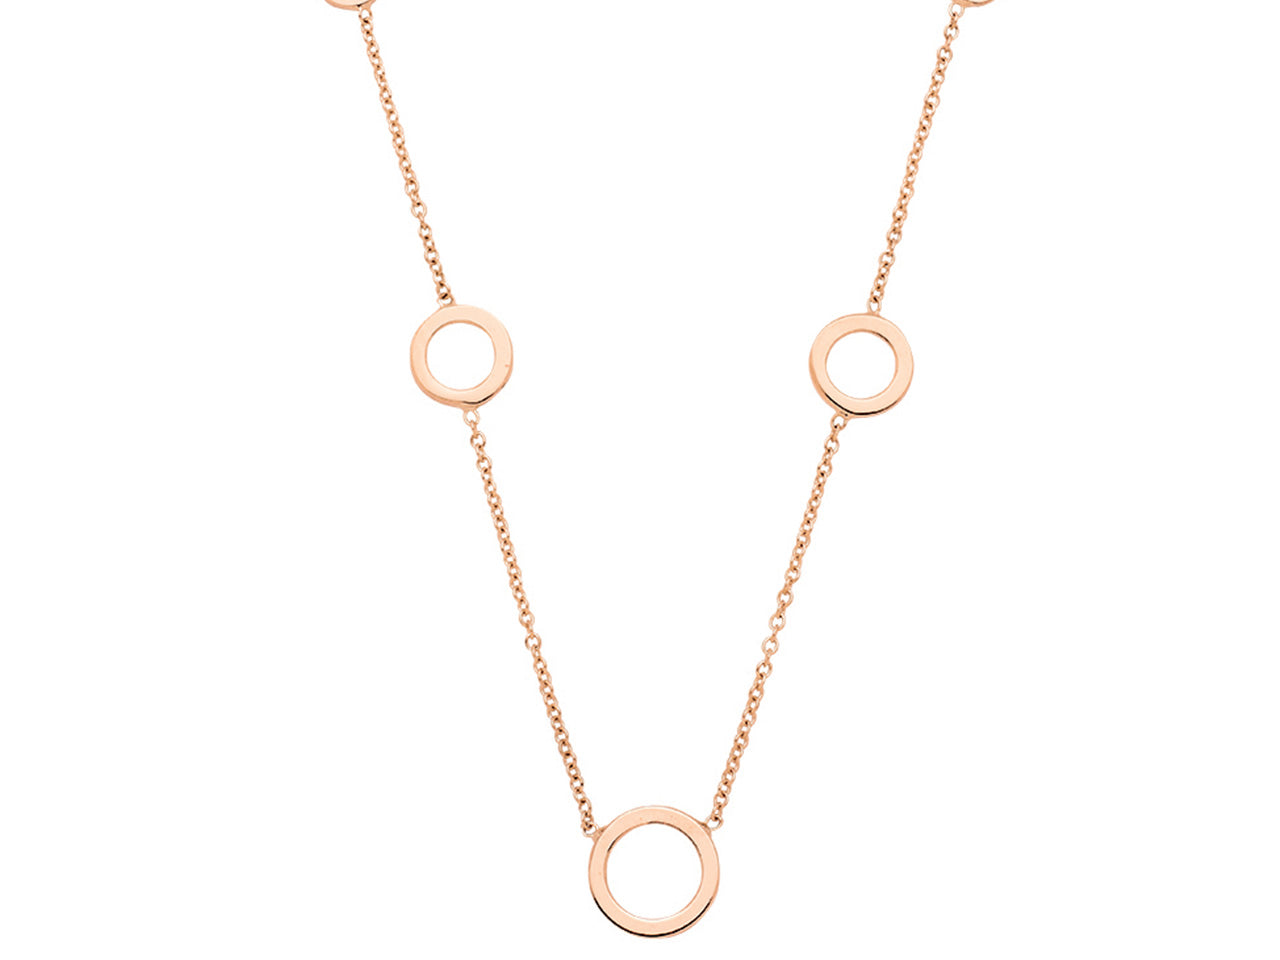 Collier Cercles chute Or rose